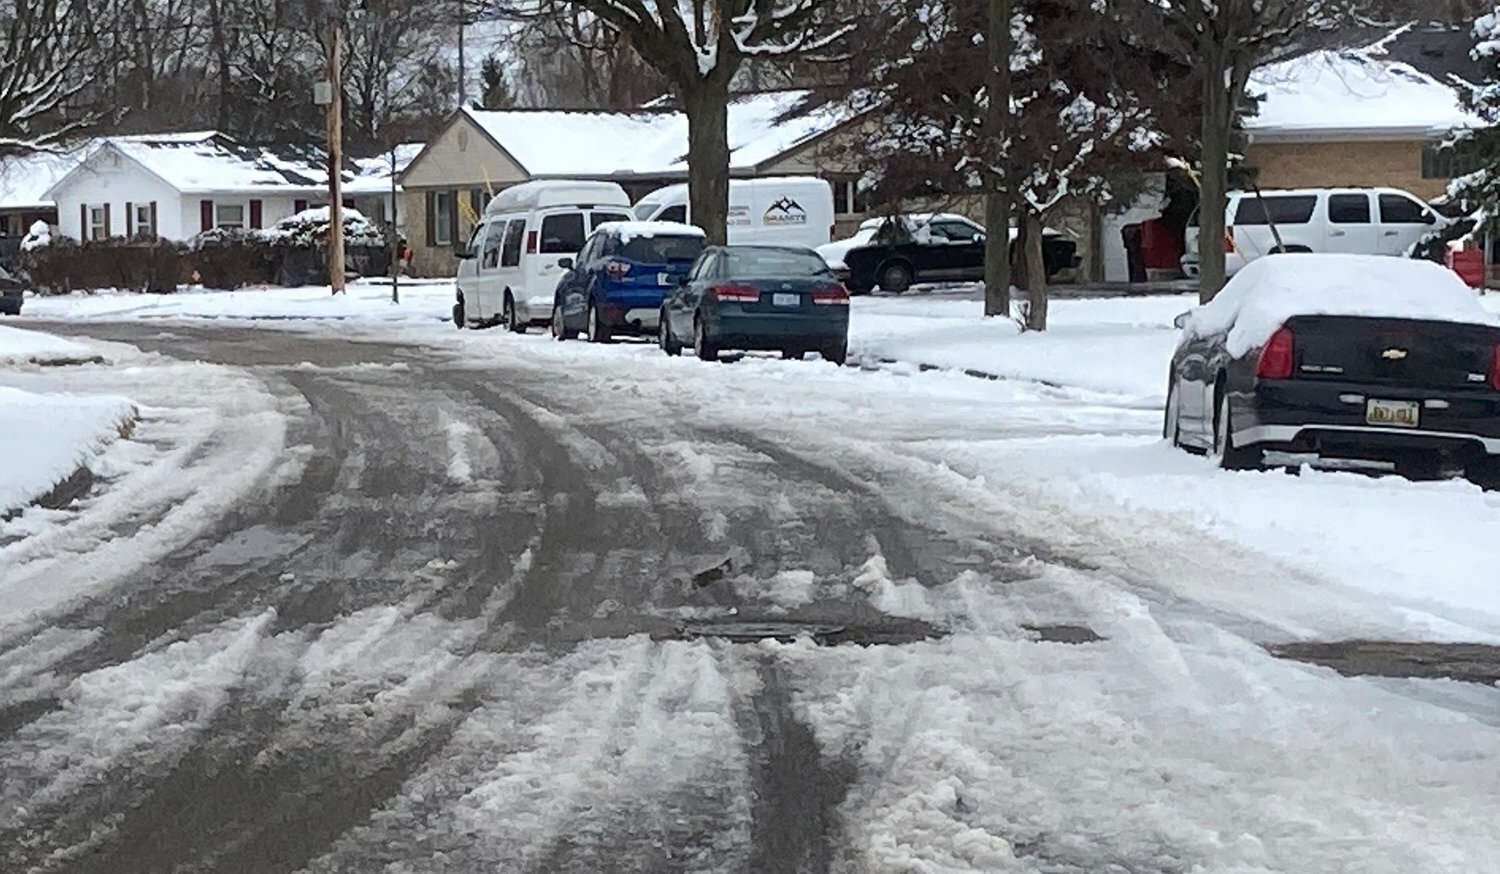 After an early January snowstorm in 2021, Lansing residents on Hillsdale Road were frustrated to see their street still covered in slush and ice days later.